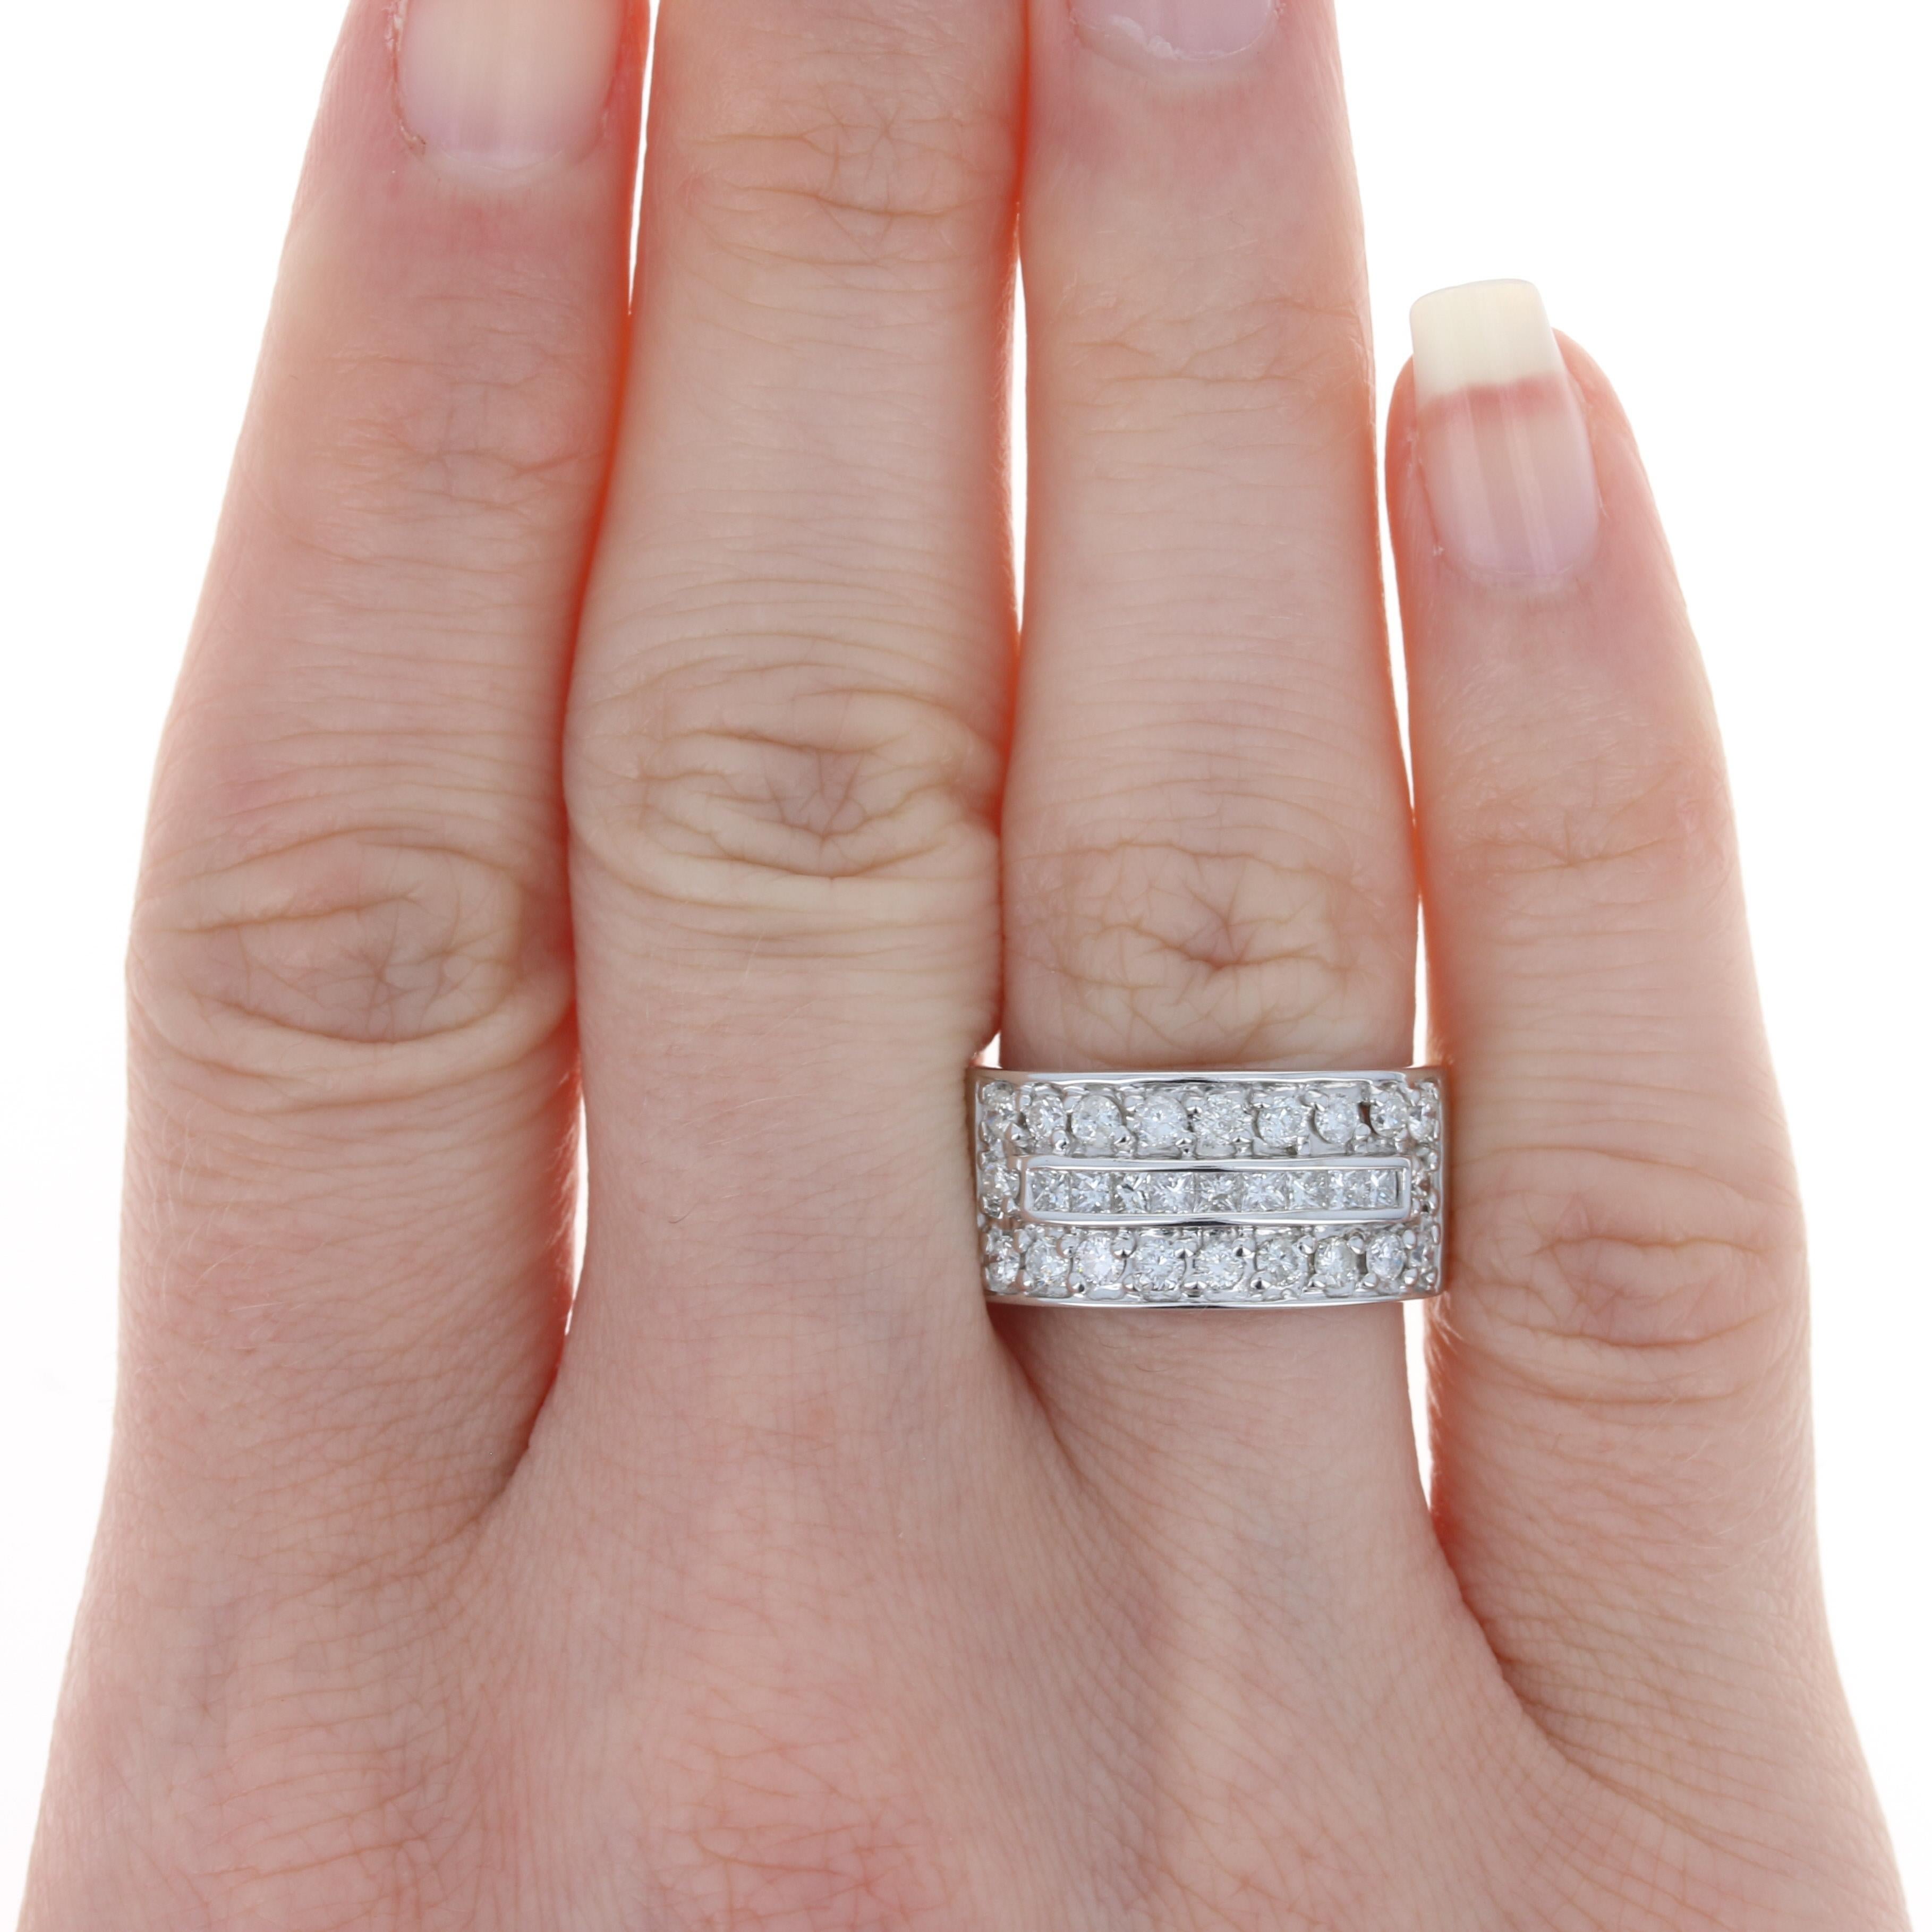 Size: 6 3/4

Metal Content: 14k White Gold

Stone Information: 
Natural Diamonds
Total Carats: 1.20ctw
Cuts: Princess & Round Brilliant
Color: G - H
Clarity: SI2 - I1

Style: Band

Face Height (north to south): 13/32